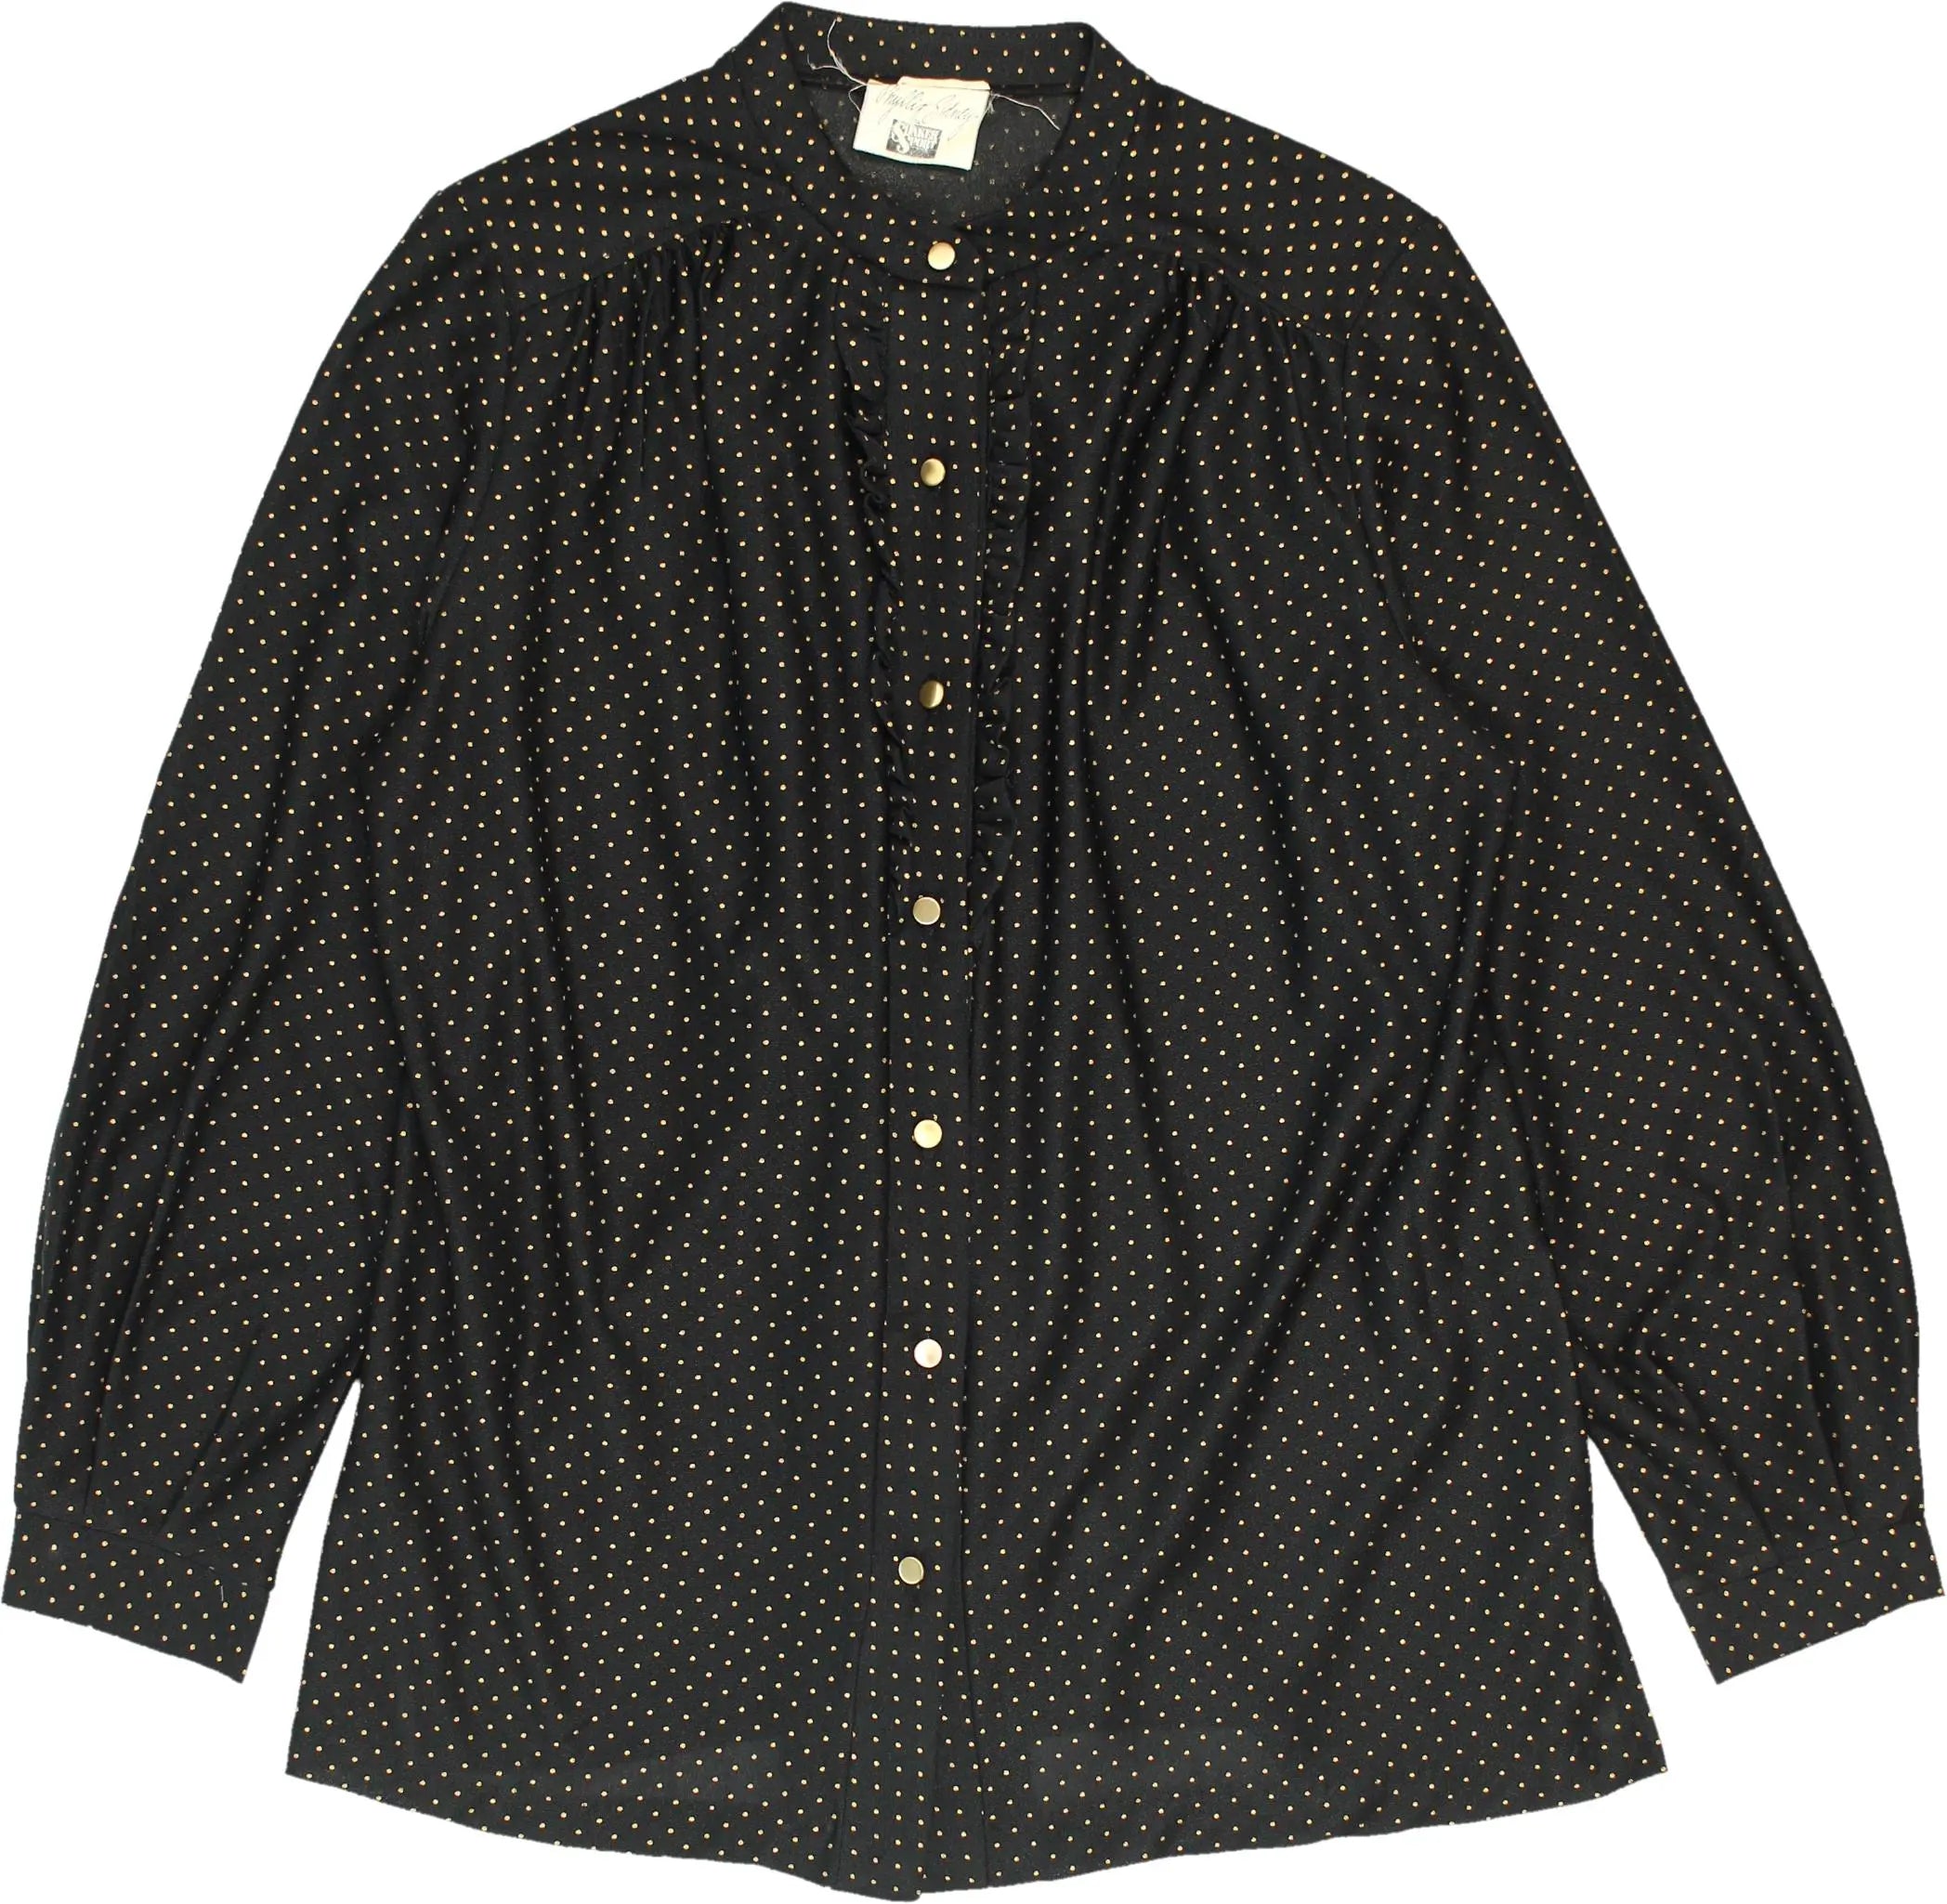 Shaker Sport - 80s Polka Dot Blouse- ThriftTale.com - Vintage and second handclothing